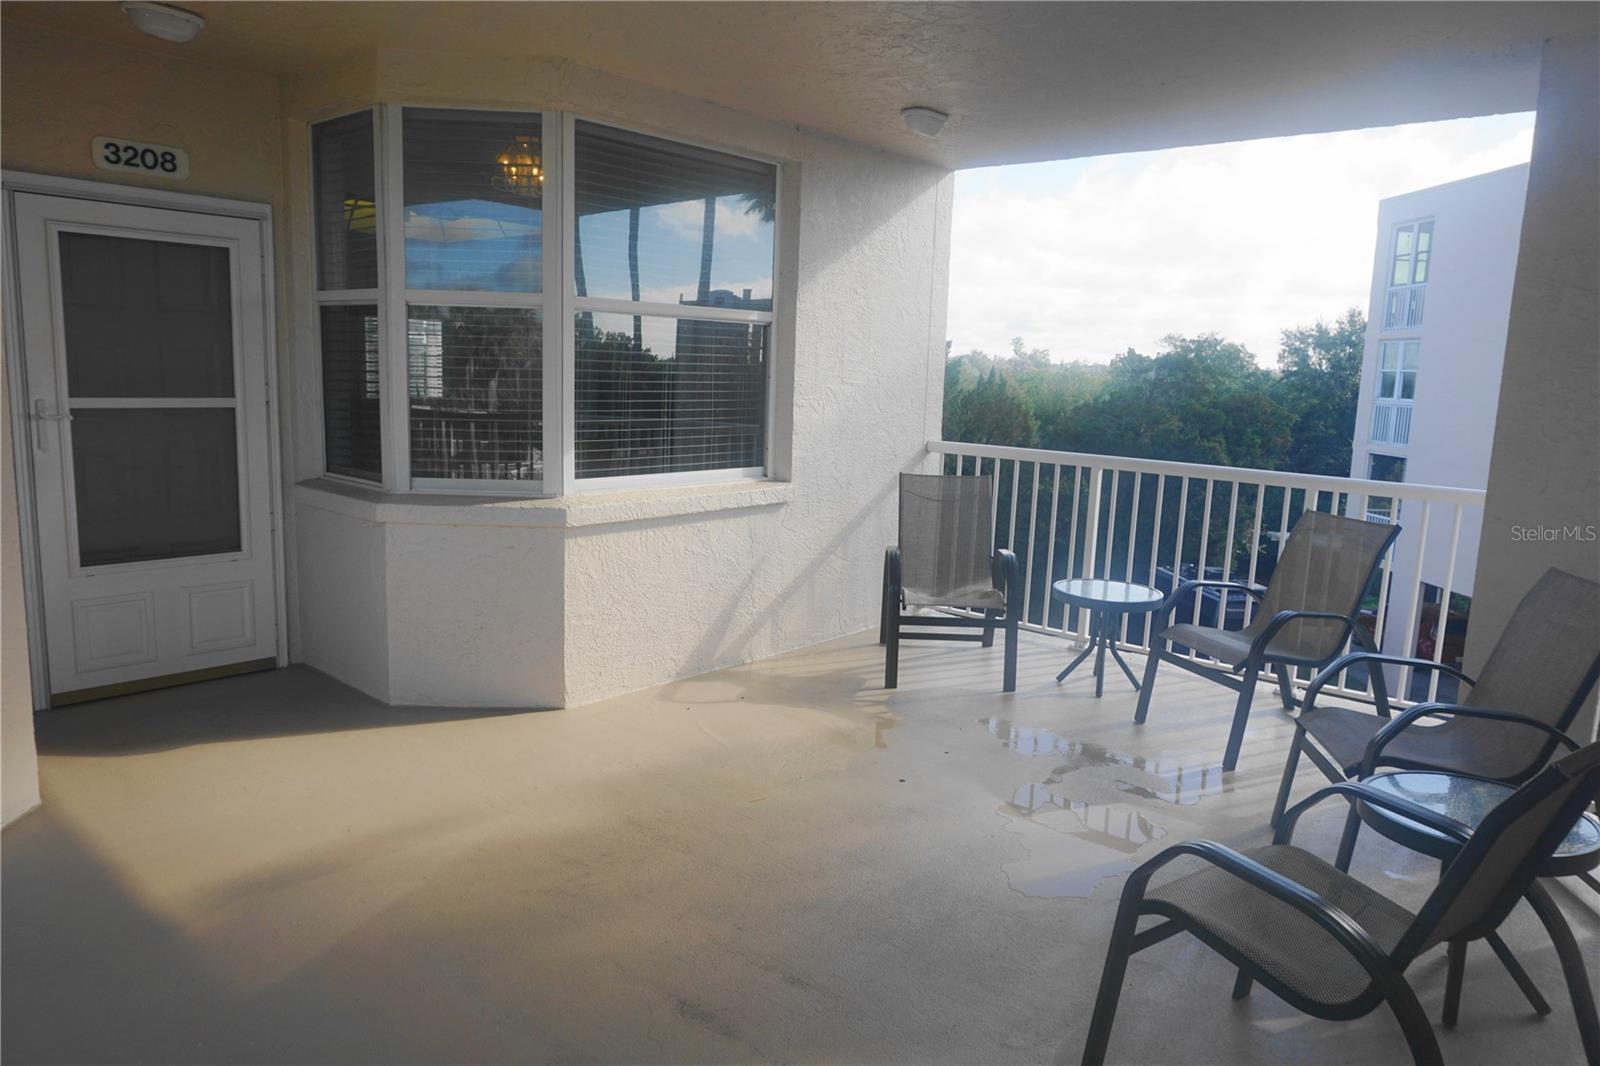 The entrance to the condo includes a large front patio -- another area great for entertaining!